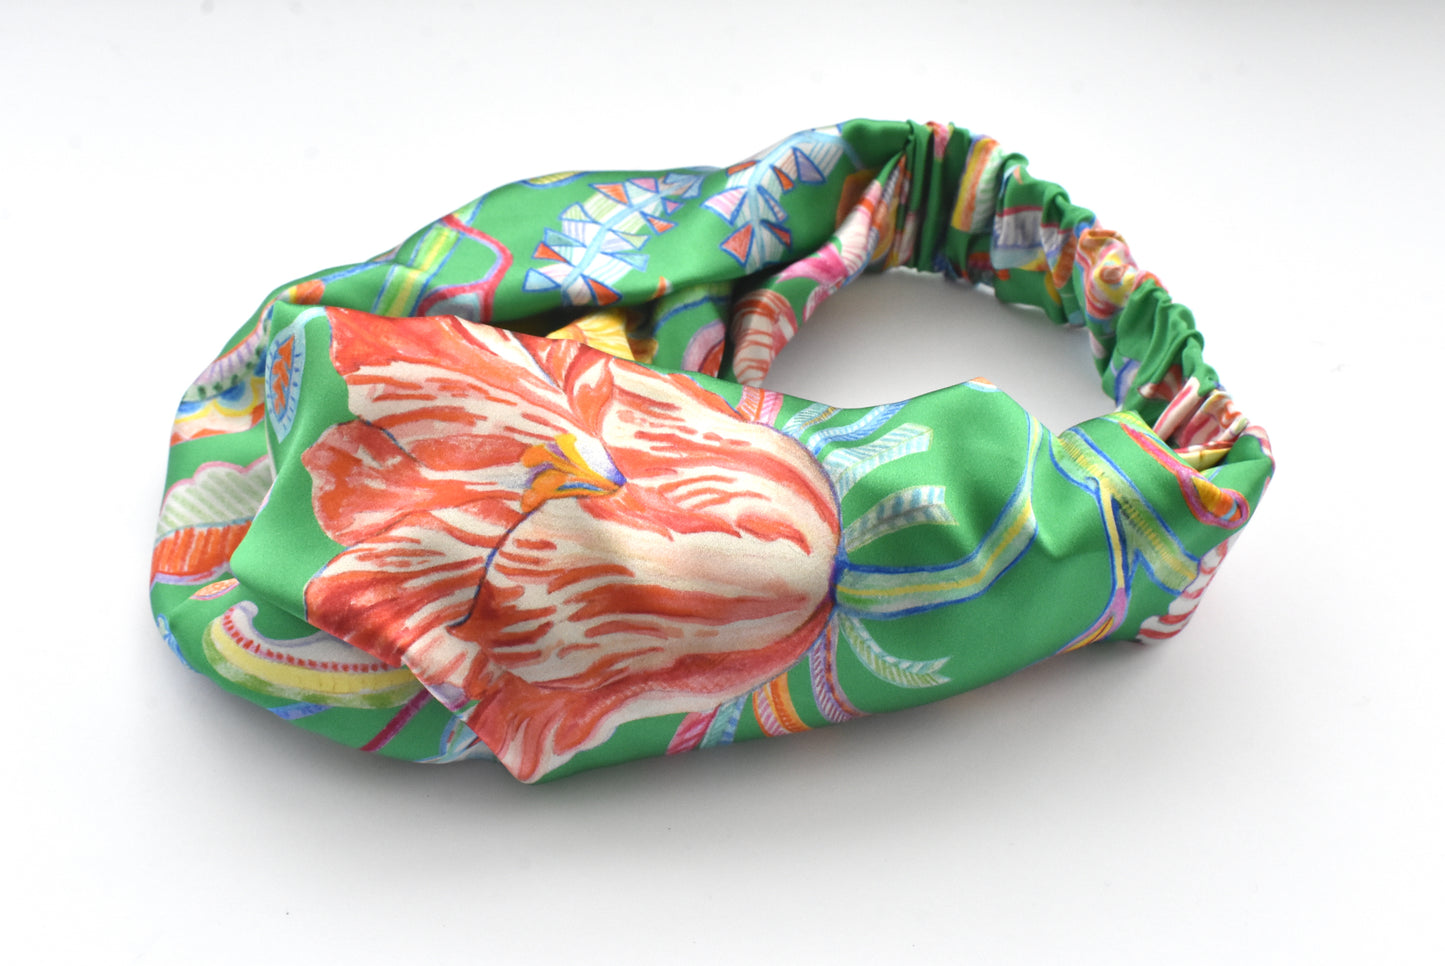 Silk Twisted Turban hairband and neck scarf in Liberty of London Garden of Reverie Silk Satin - 100% silk